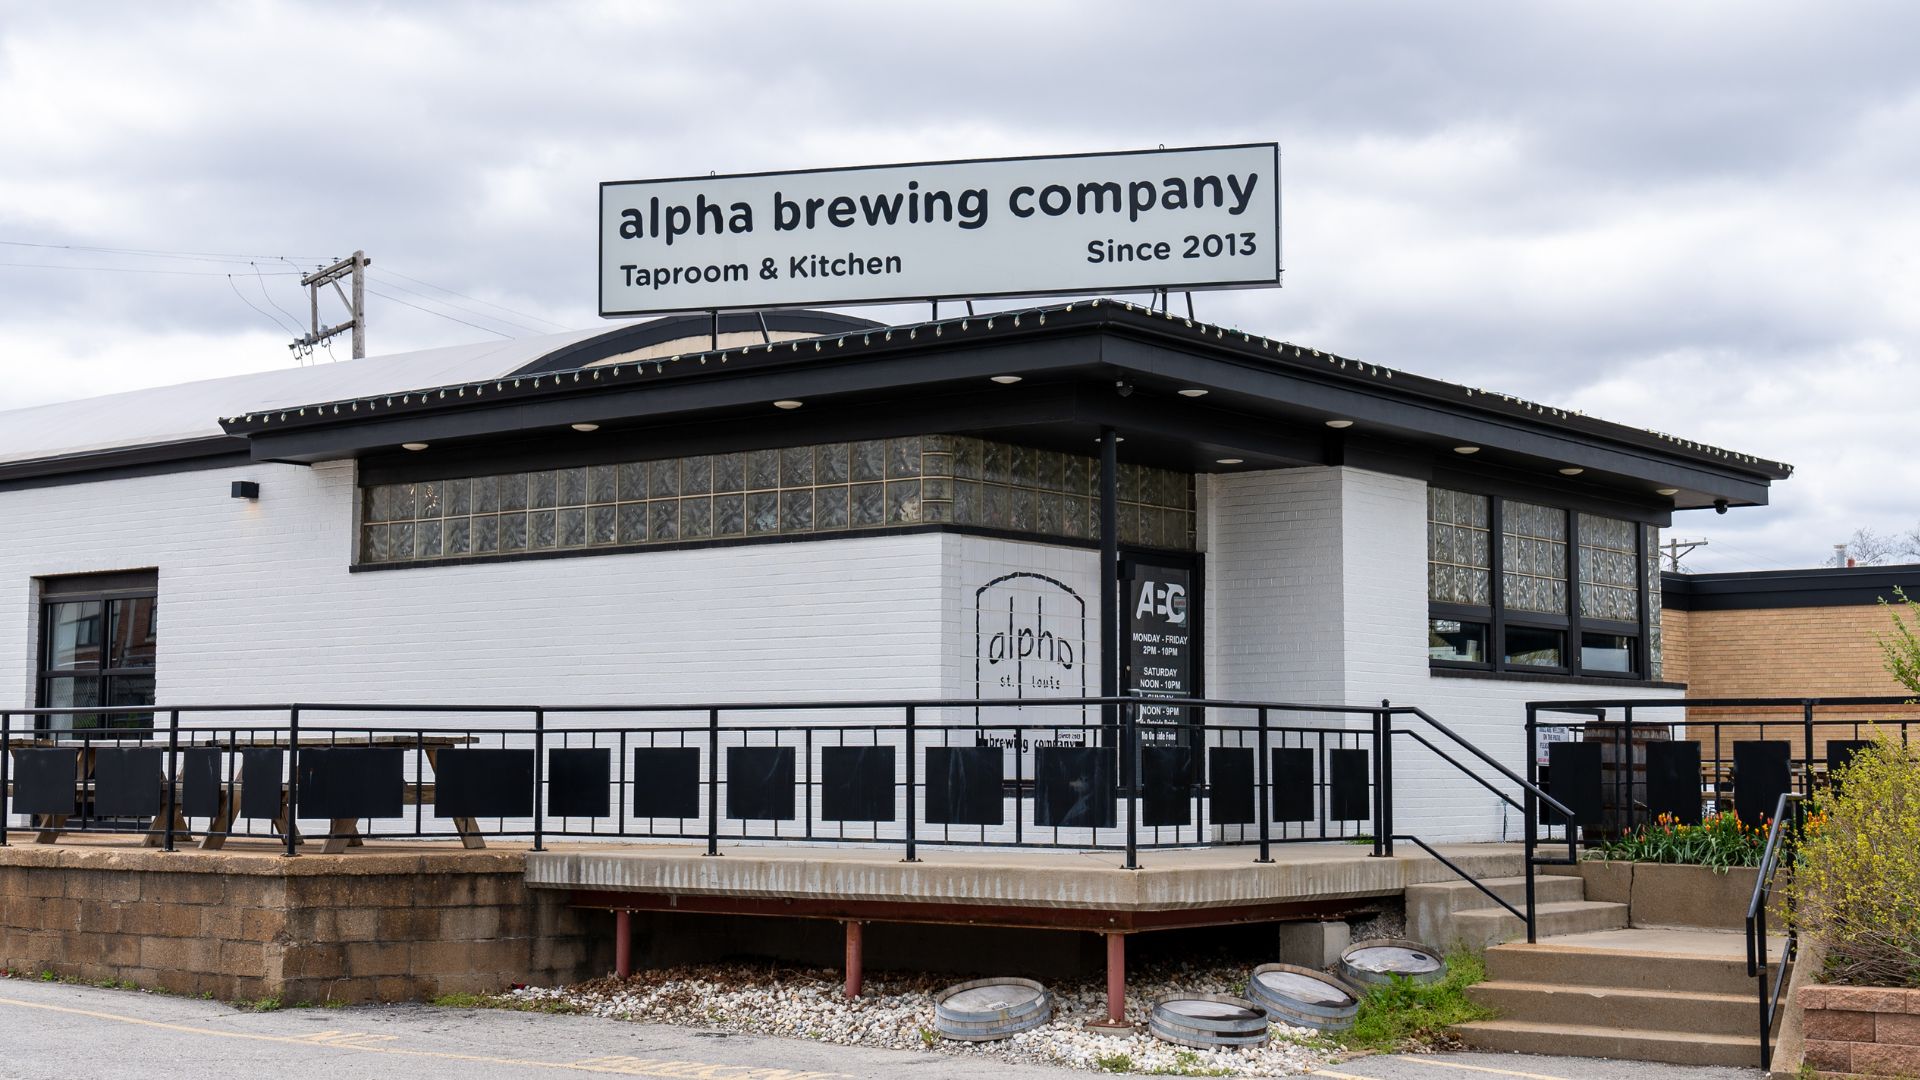 Alpha Brewing Company has a brewery and taproom on Fyler Avenue.